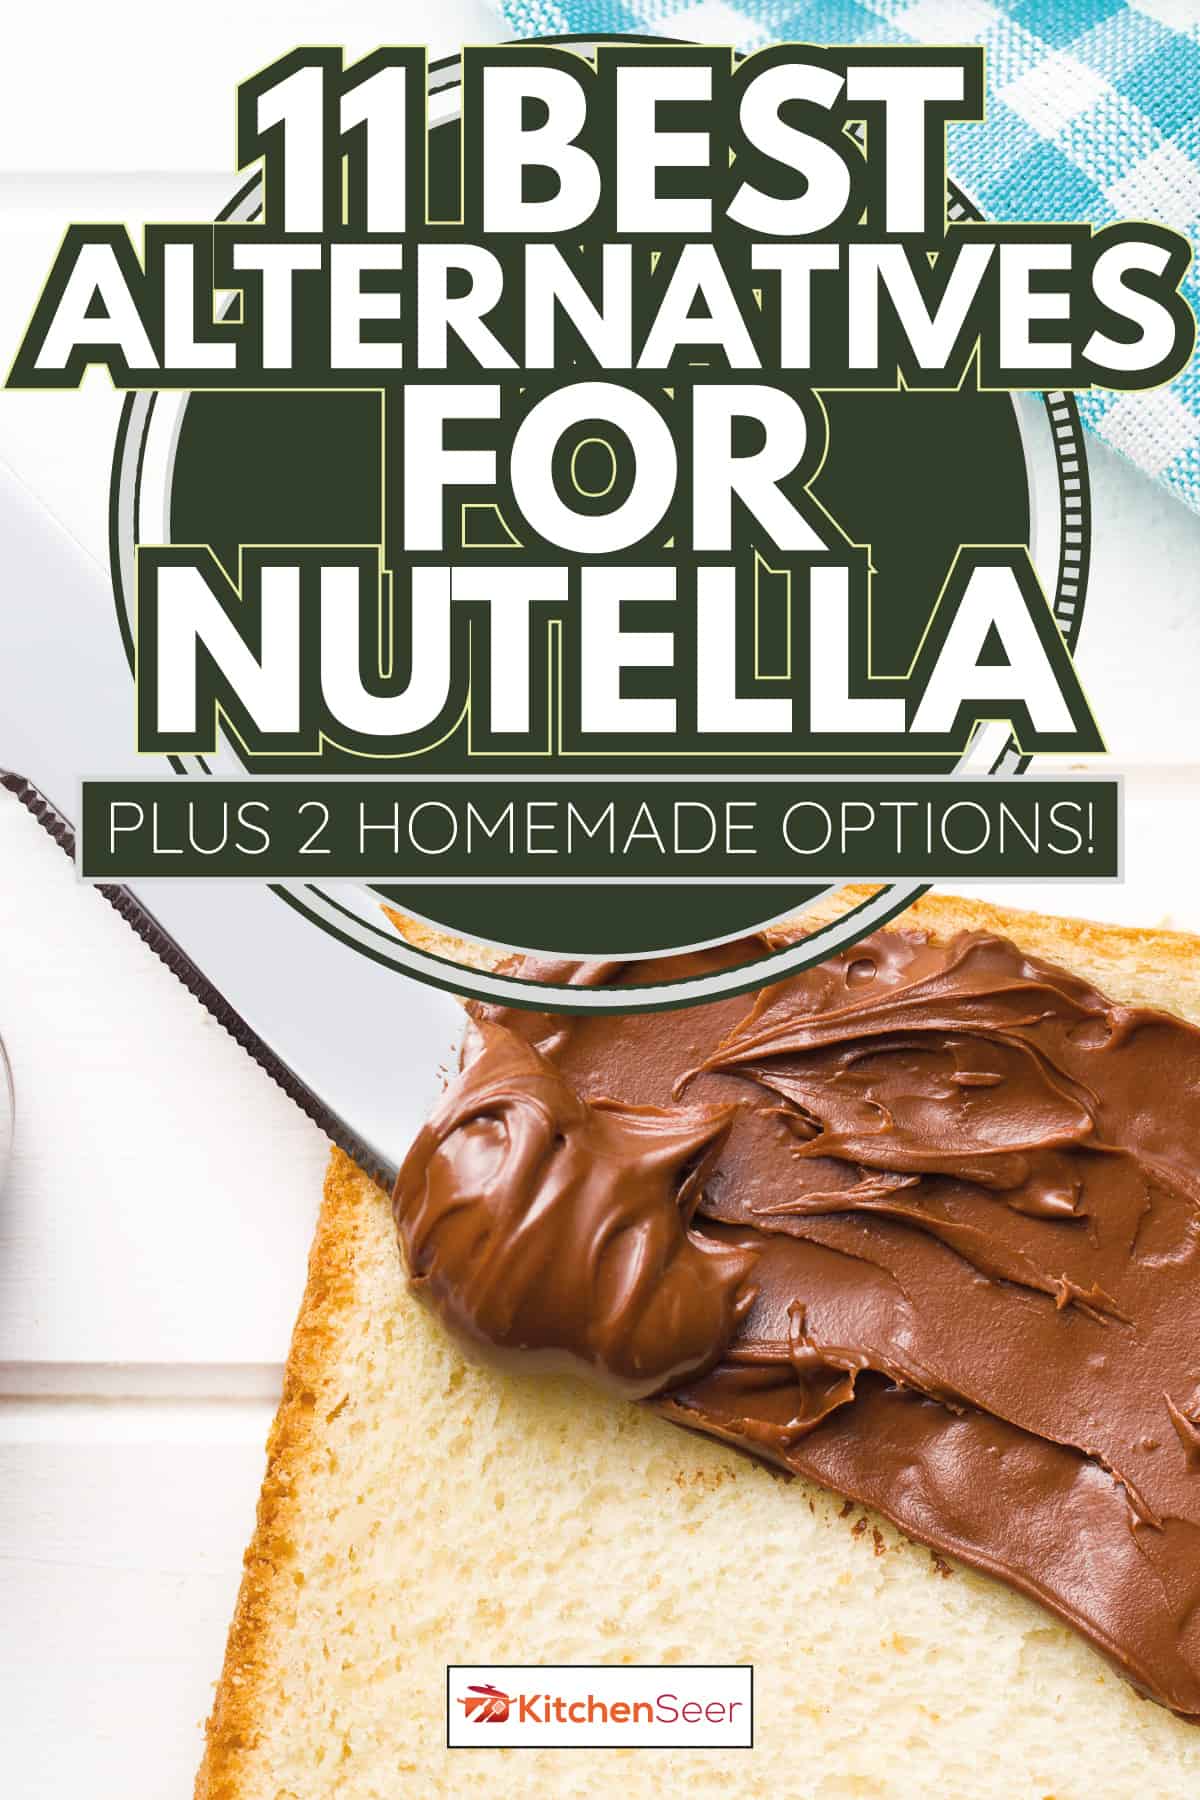 chocolate spread with bread on a white plate. 11 Best Alternatives For Nutella [Plus 2 Homemade Options!]